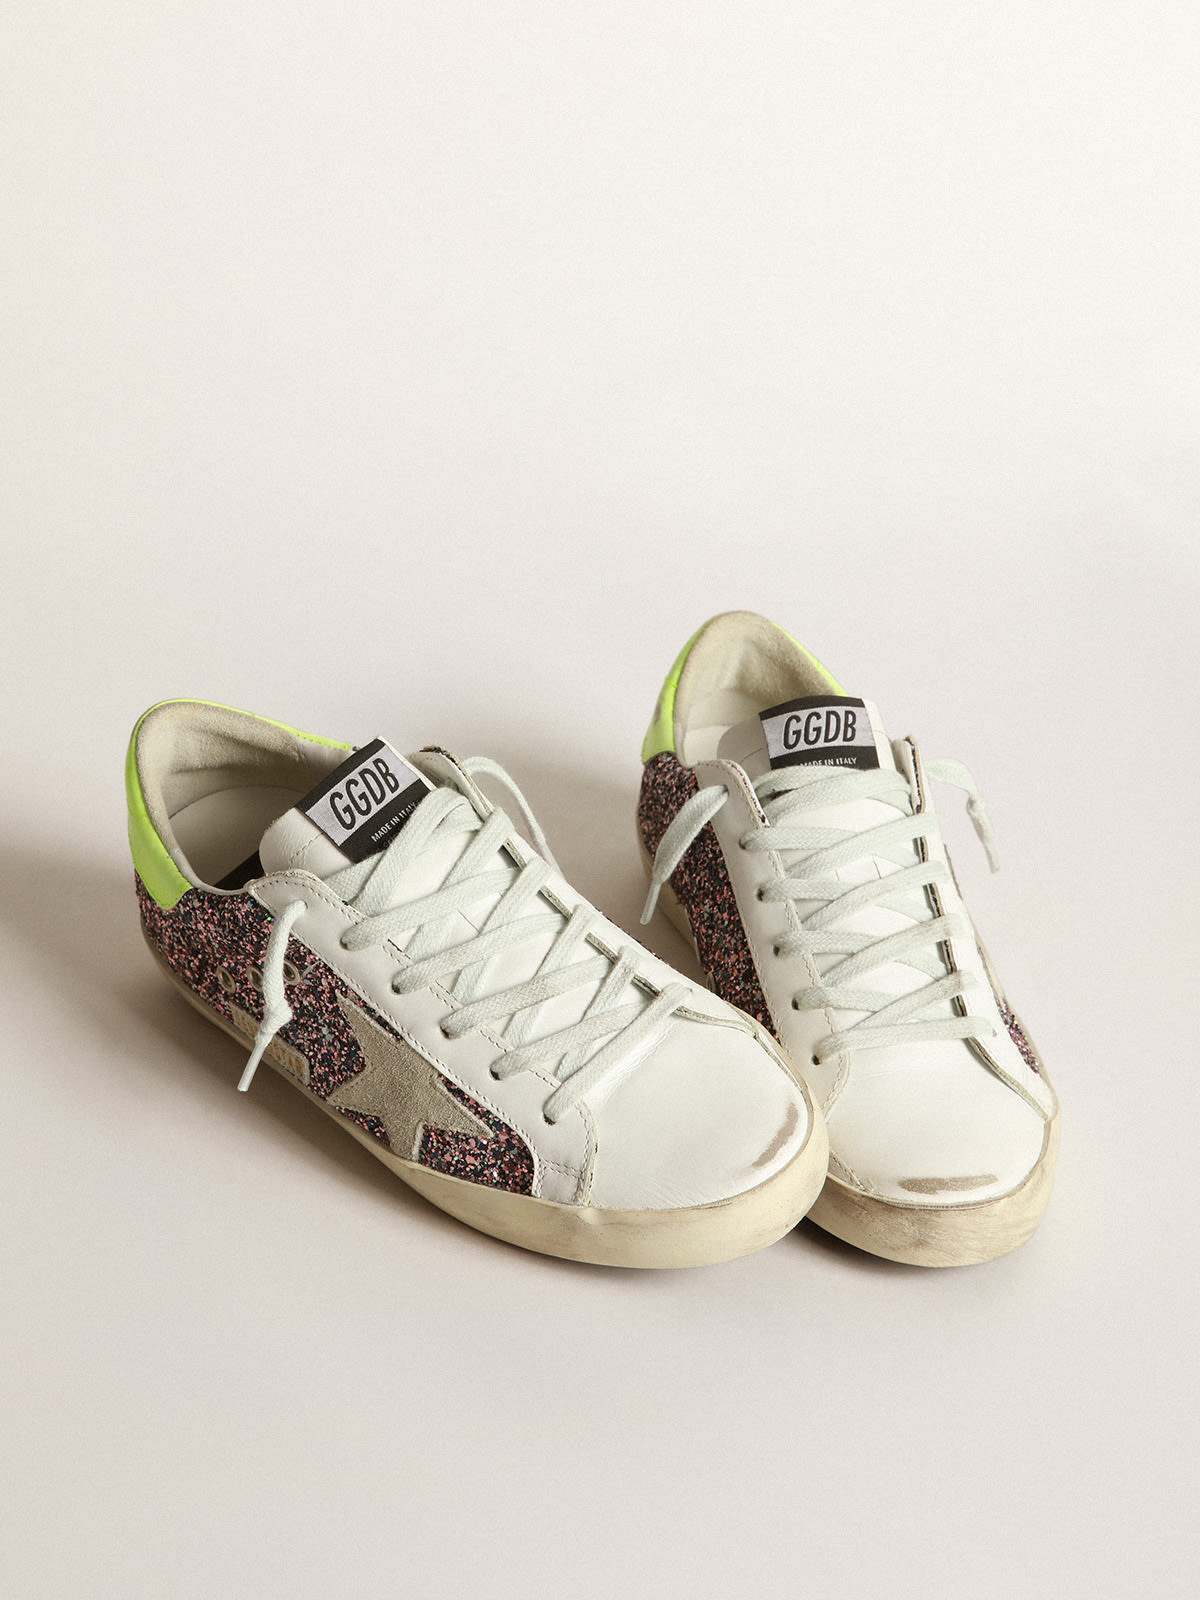 Golden Goose - Super-Star sneakers in gray and pink glitter with ice-gray suede star and fluorescent yellow leather heel tab in 